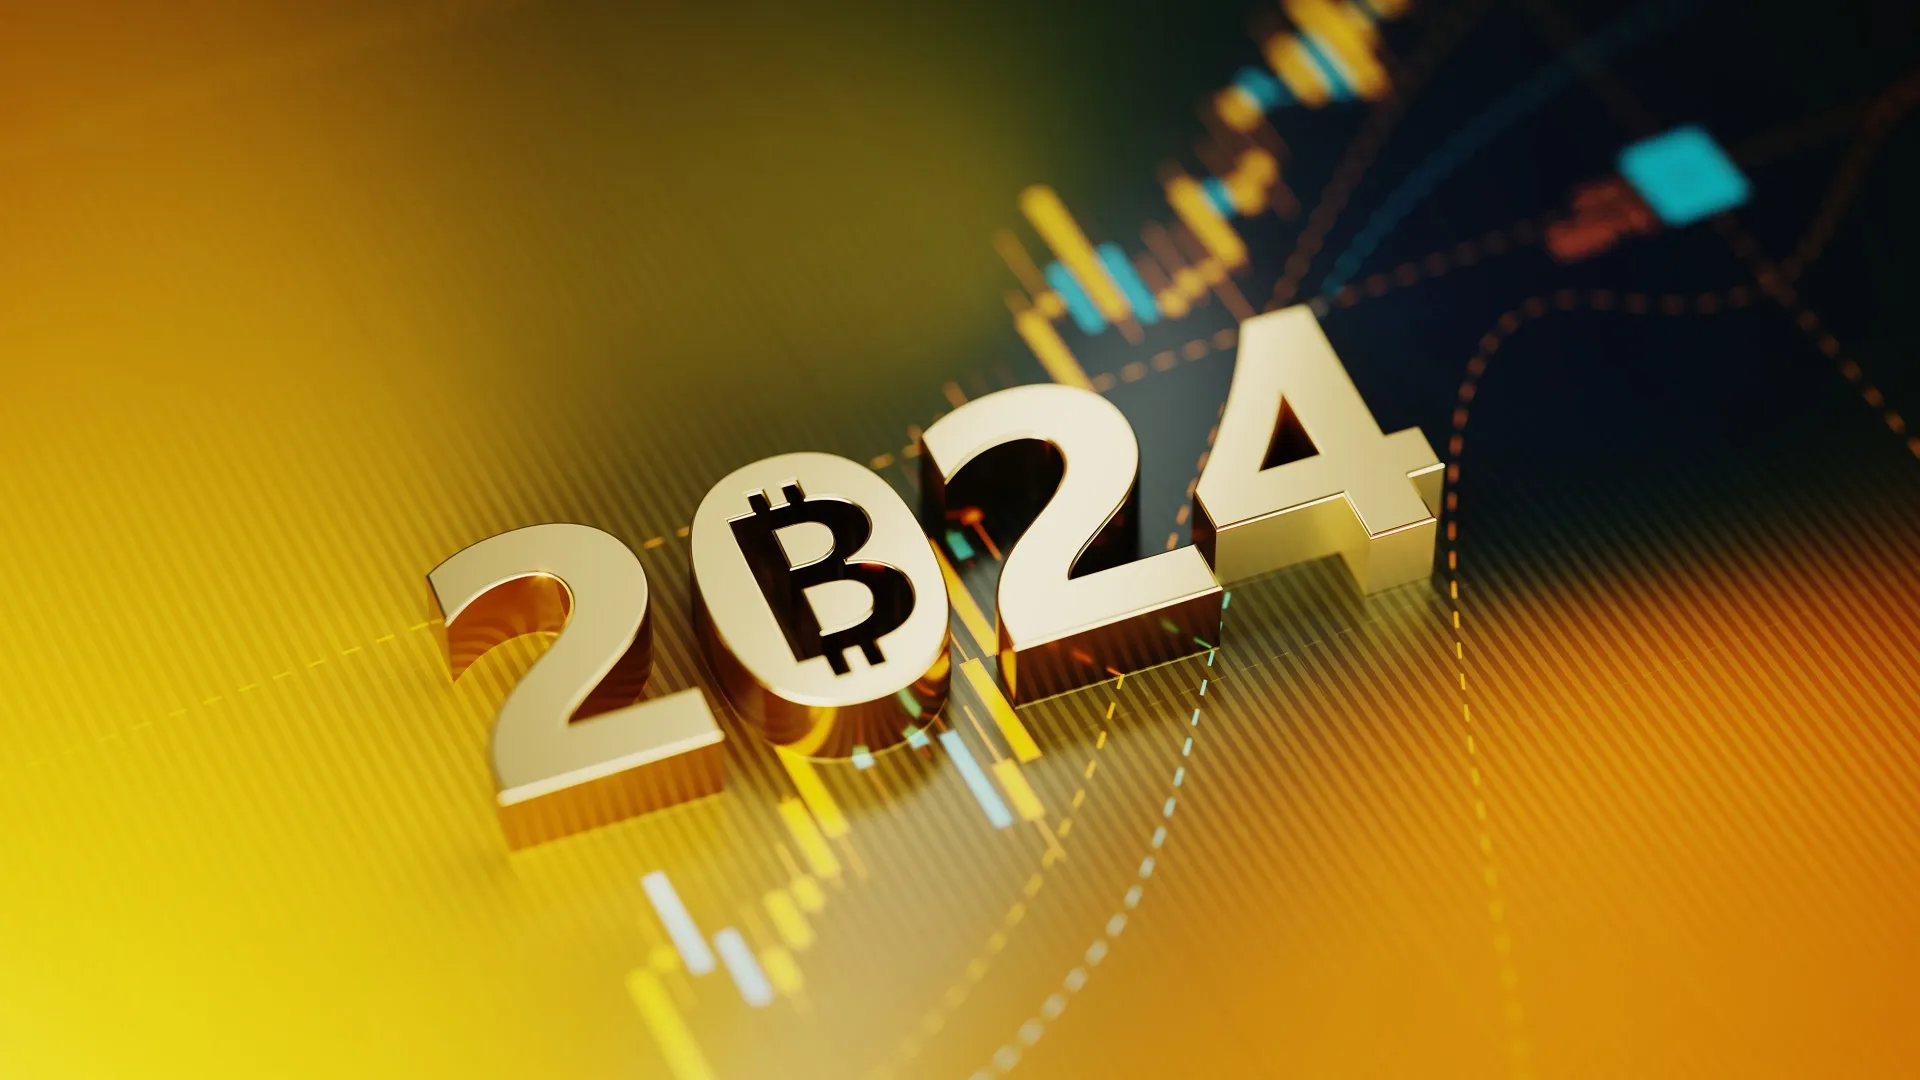 Investment And Finance Concept - Bitcoin Symbol Sitting Inside Of 2024 On Yellow Financial Graph Background stock photo